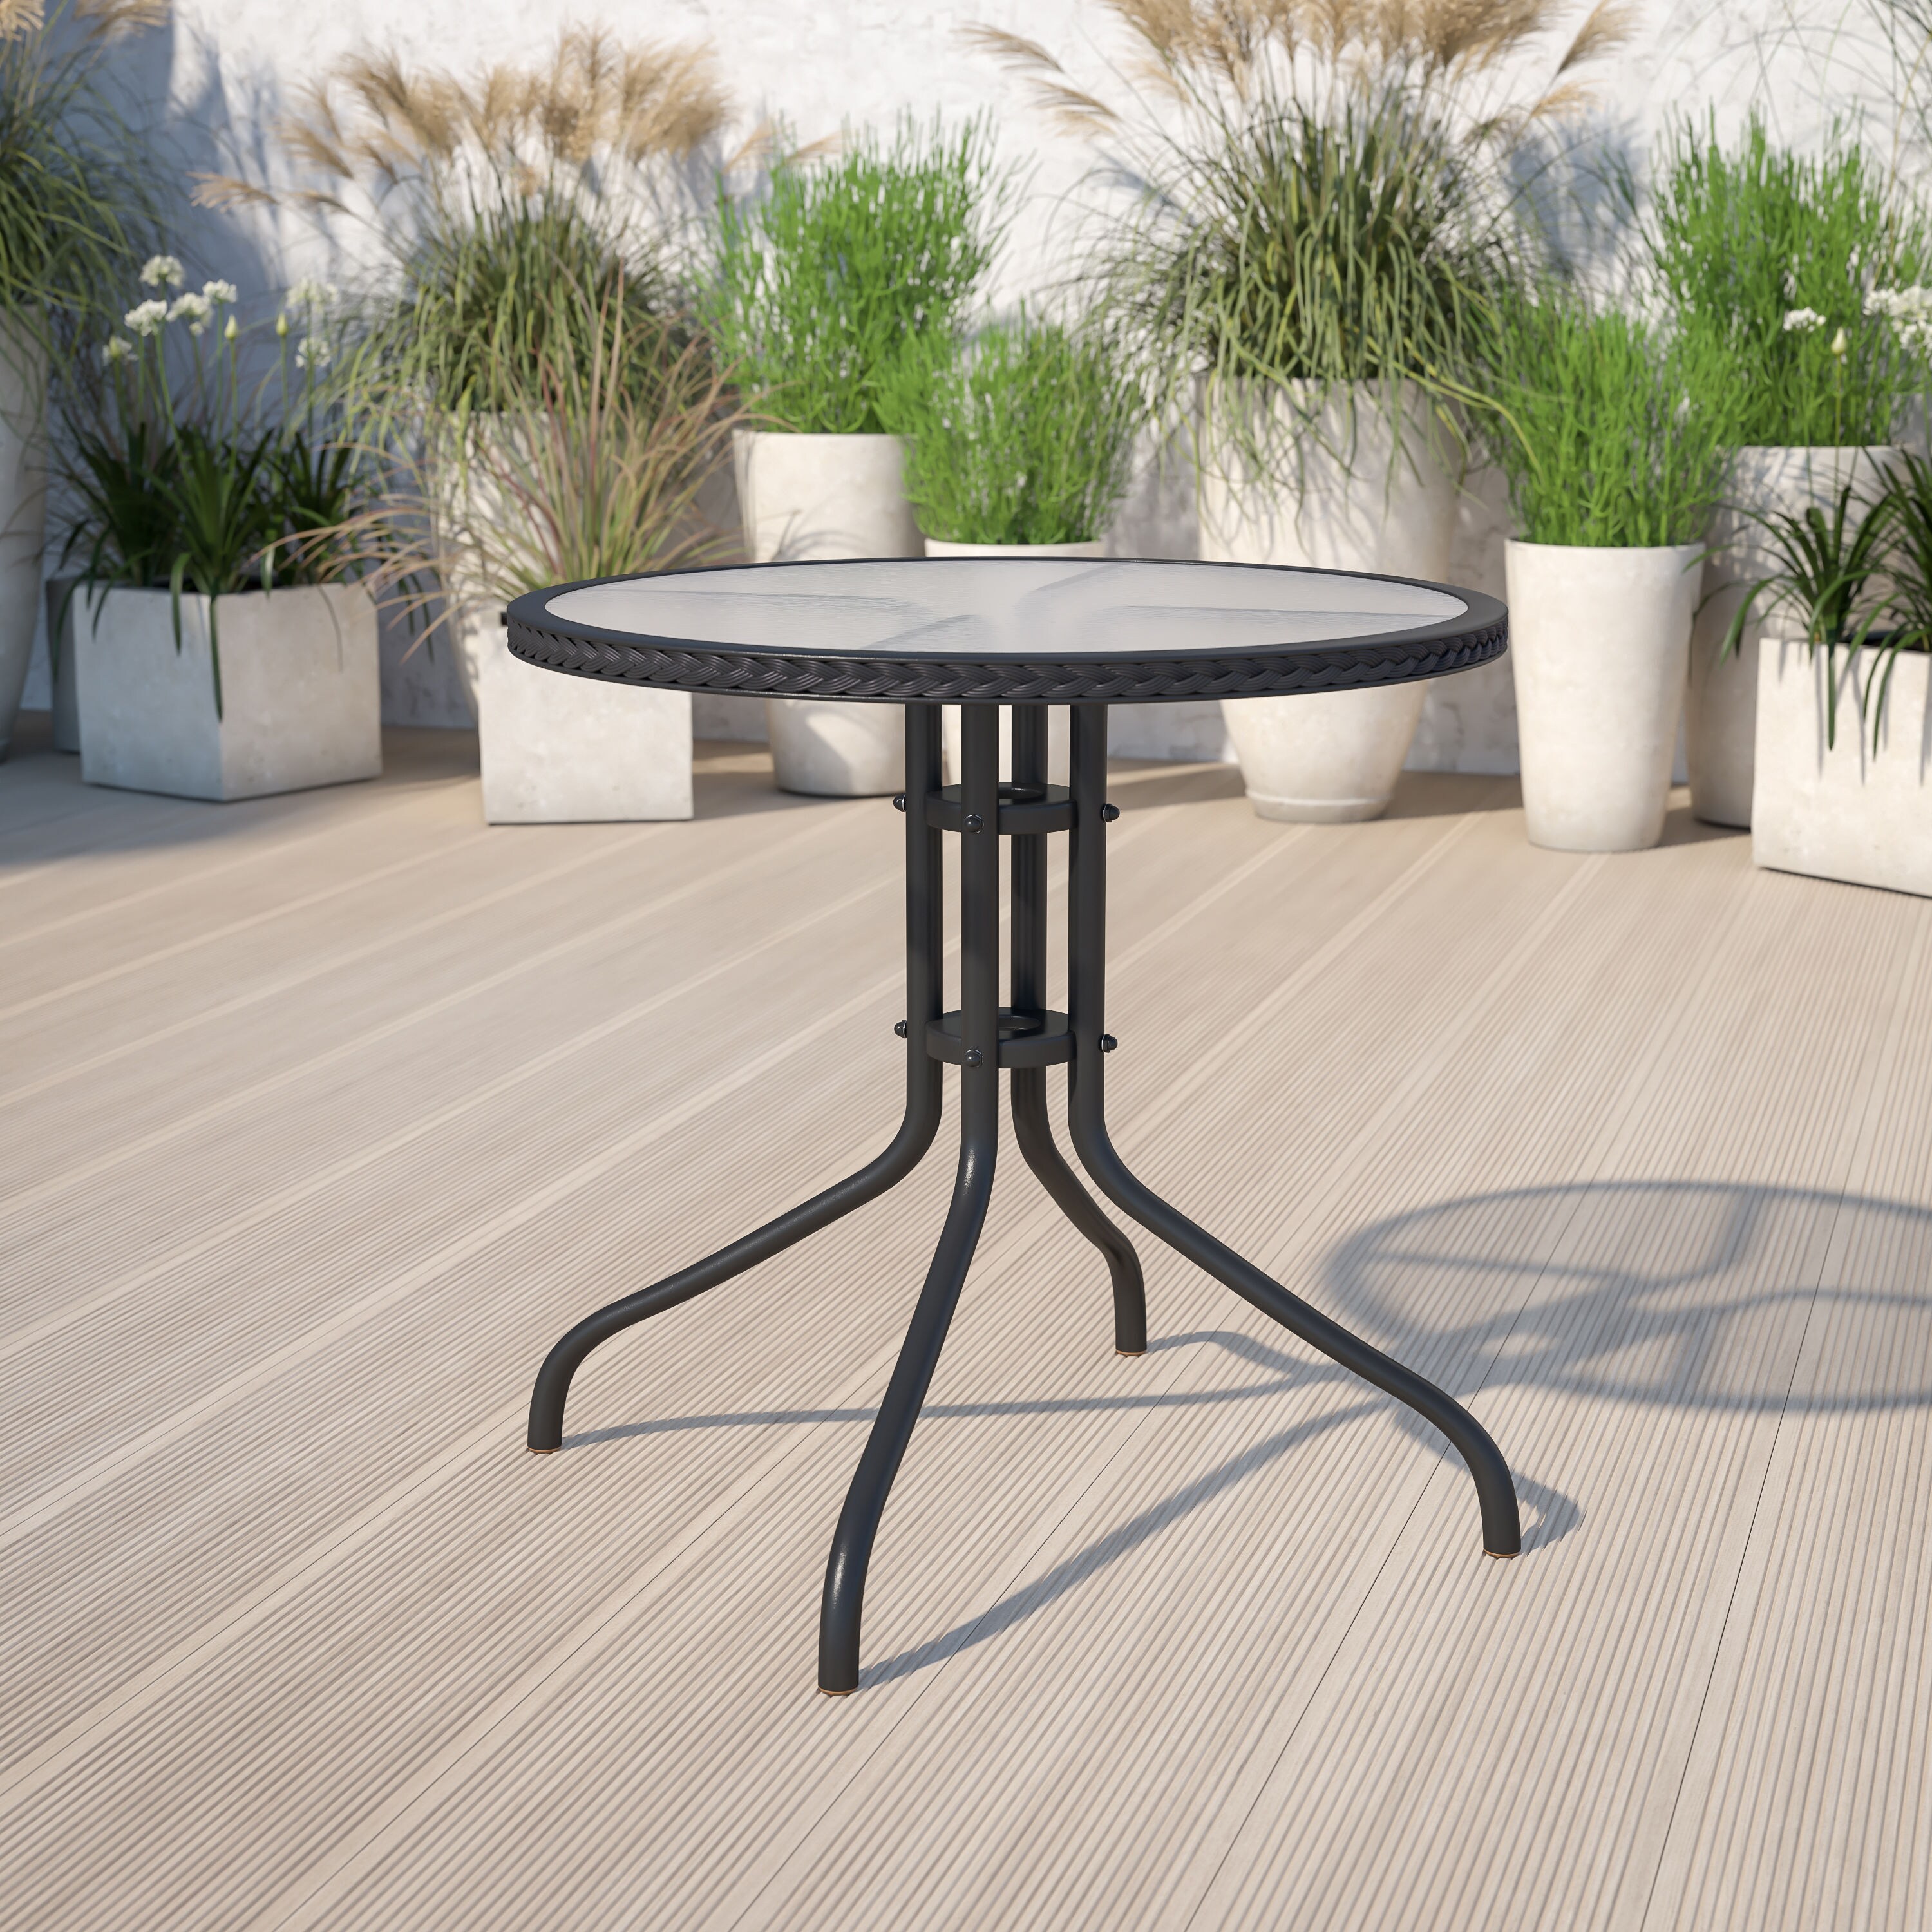 24 Outdoor Bistro Table Patio Dining Table Round Side Table Coffee Table Furniture with Metal Frame Water Ripple Glass Top 